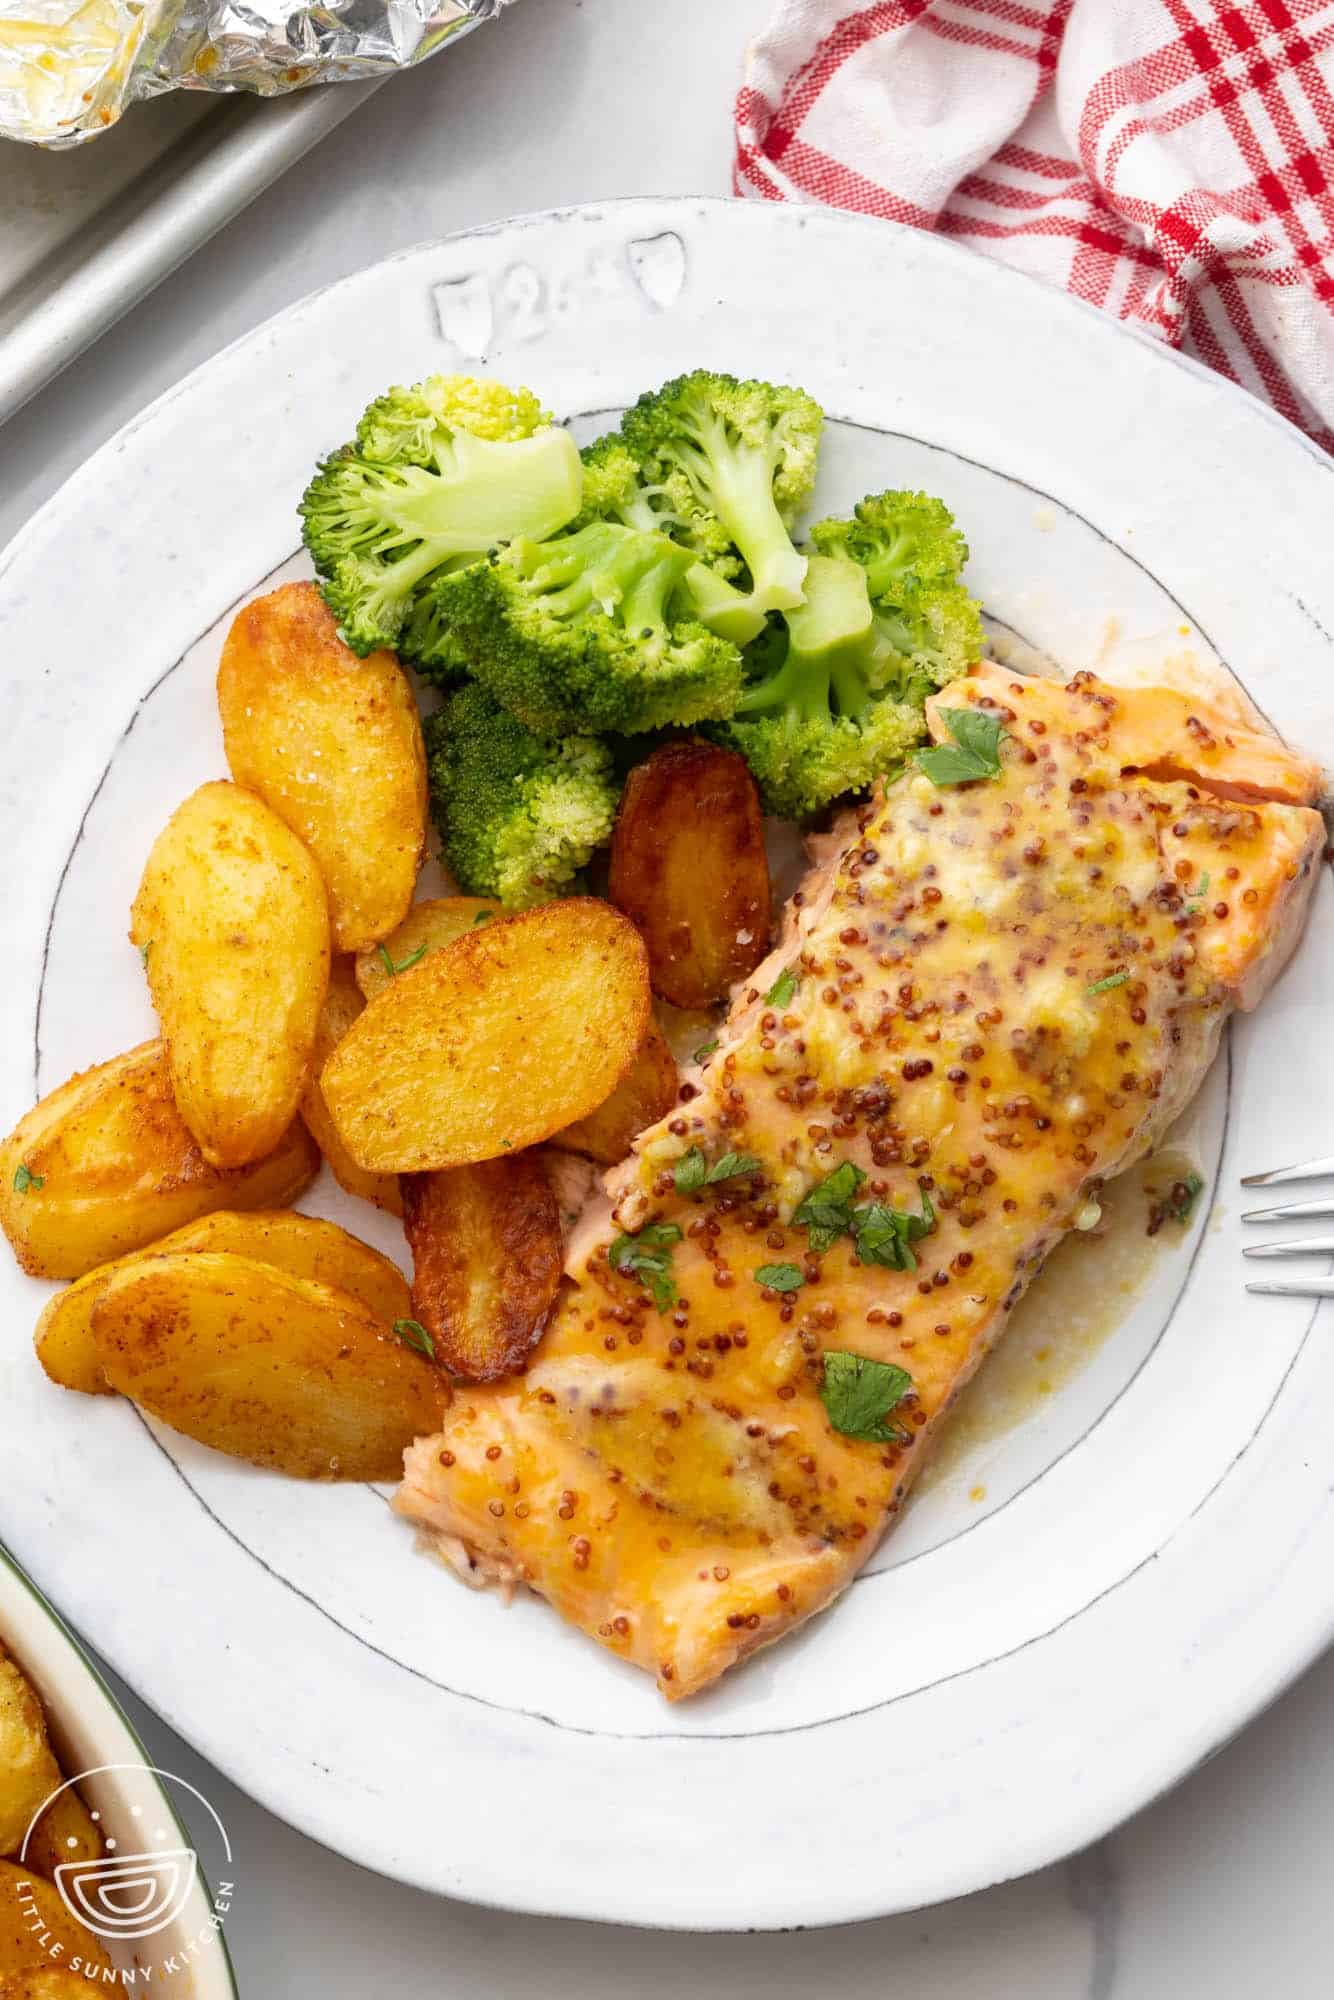 a dinner plate of honey mustard salmon, fingerling potatoes, and broccoli